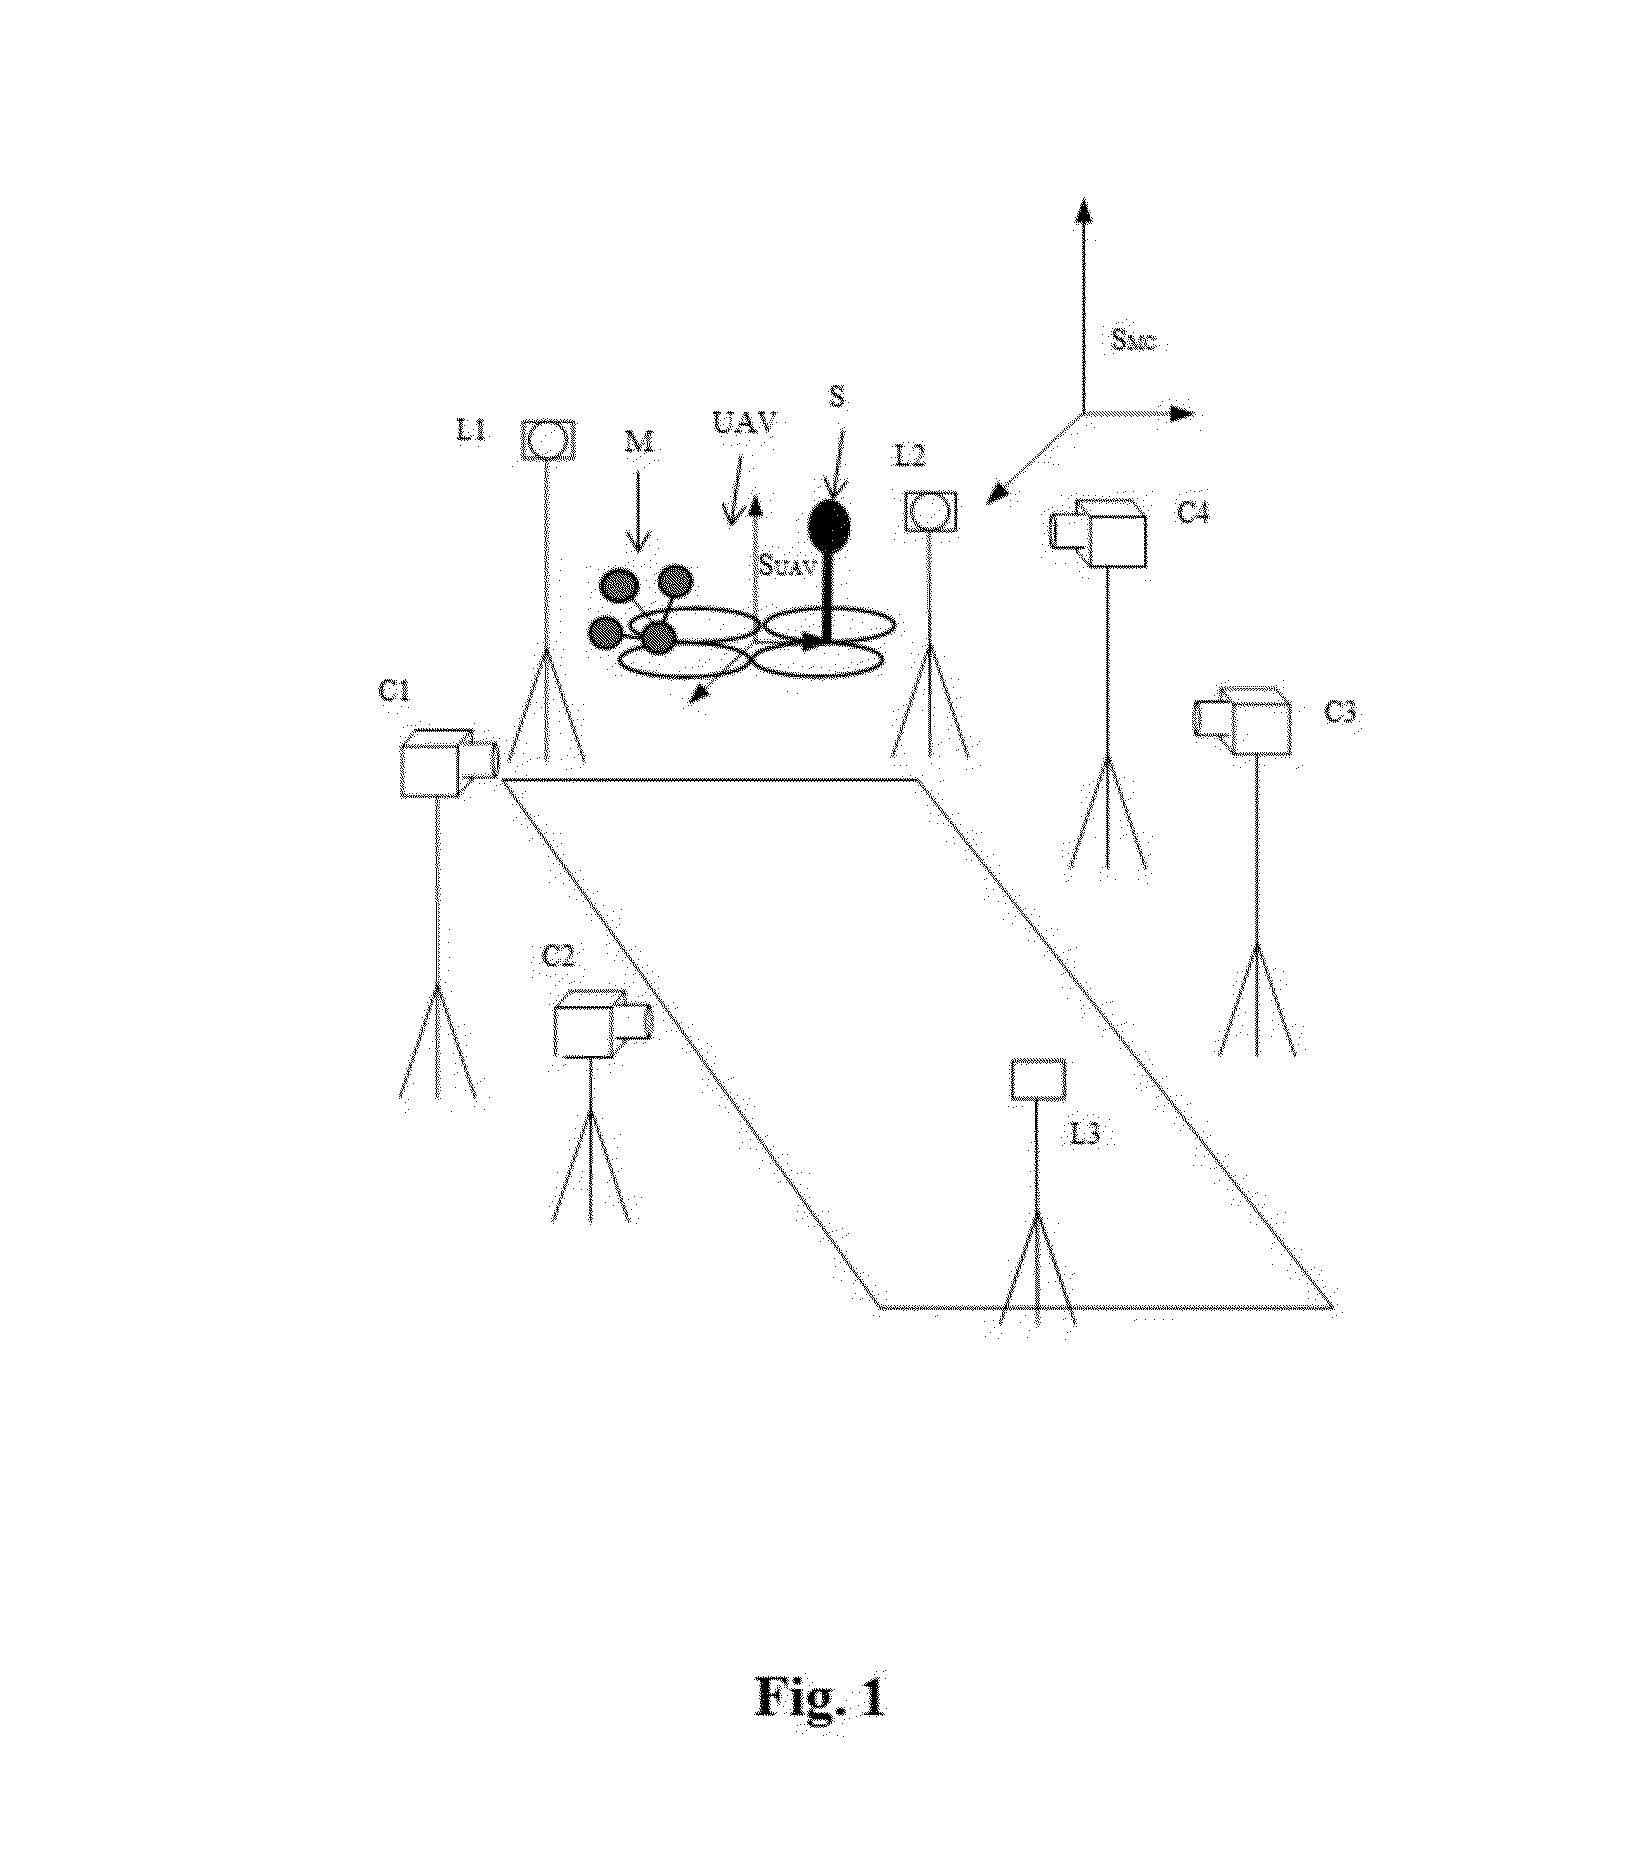 Method for shooting a performance using an unmanned aerial vehicle